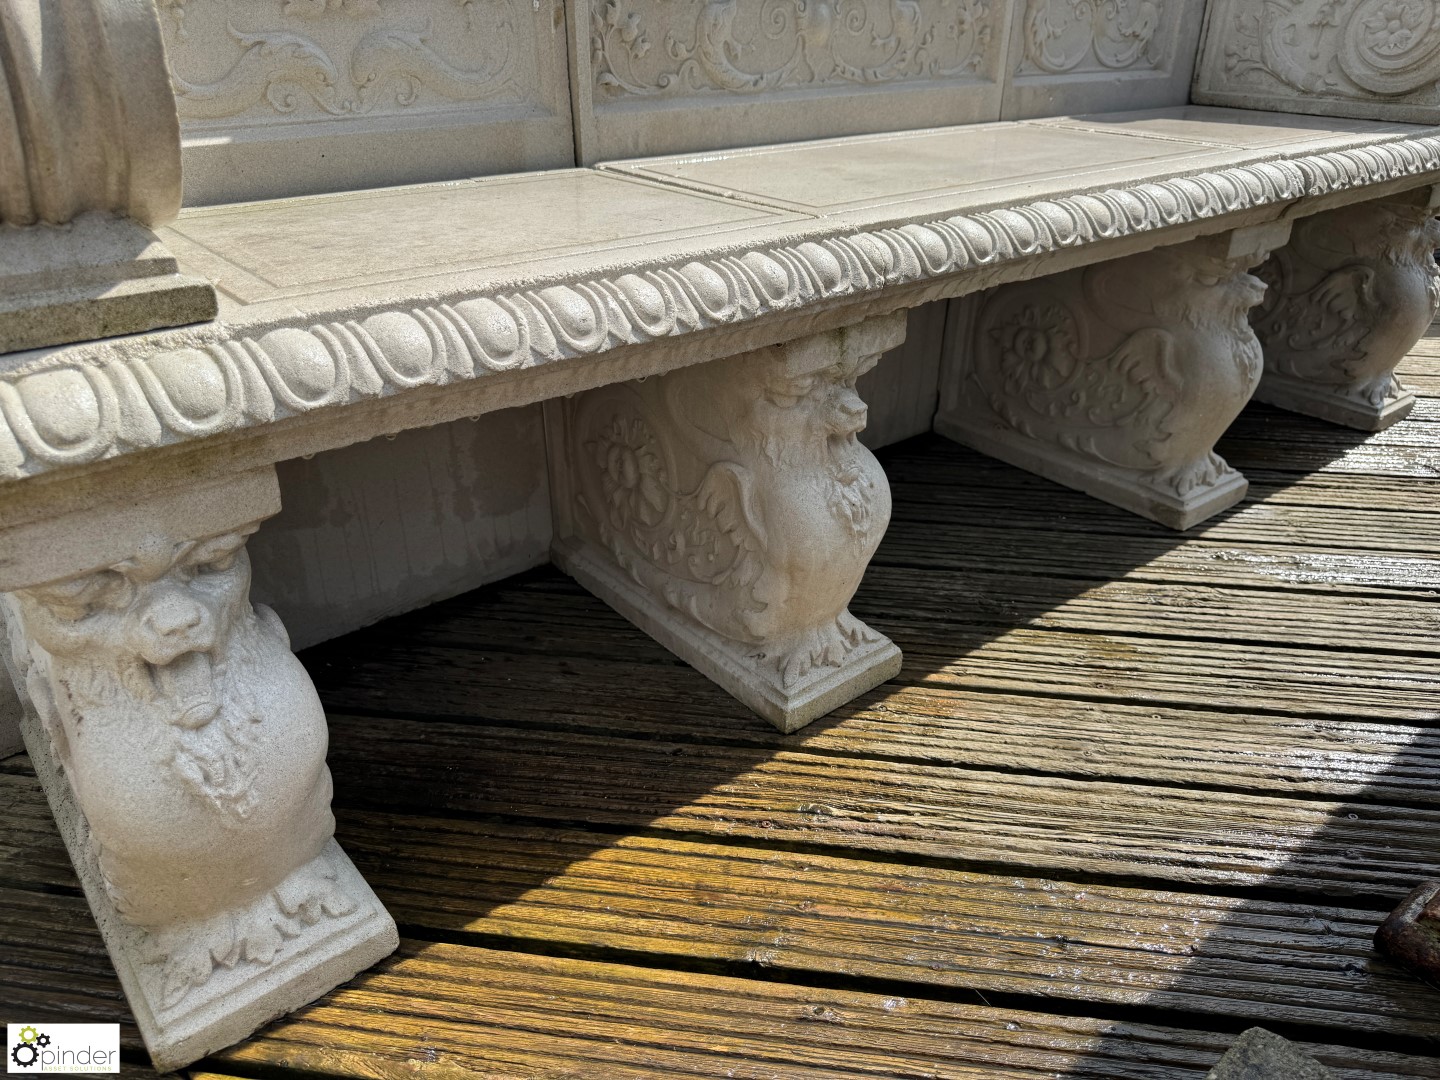 A reconstituted Haddonstone Garden Bench, with classical decoration by Raphael, approx. 40in x 86in - Image 12 of 15